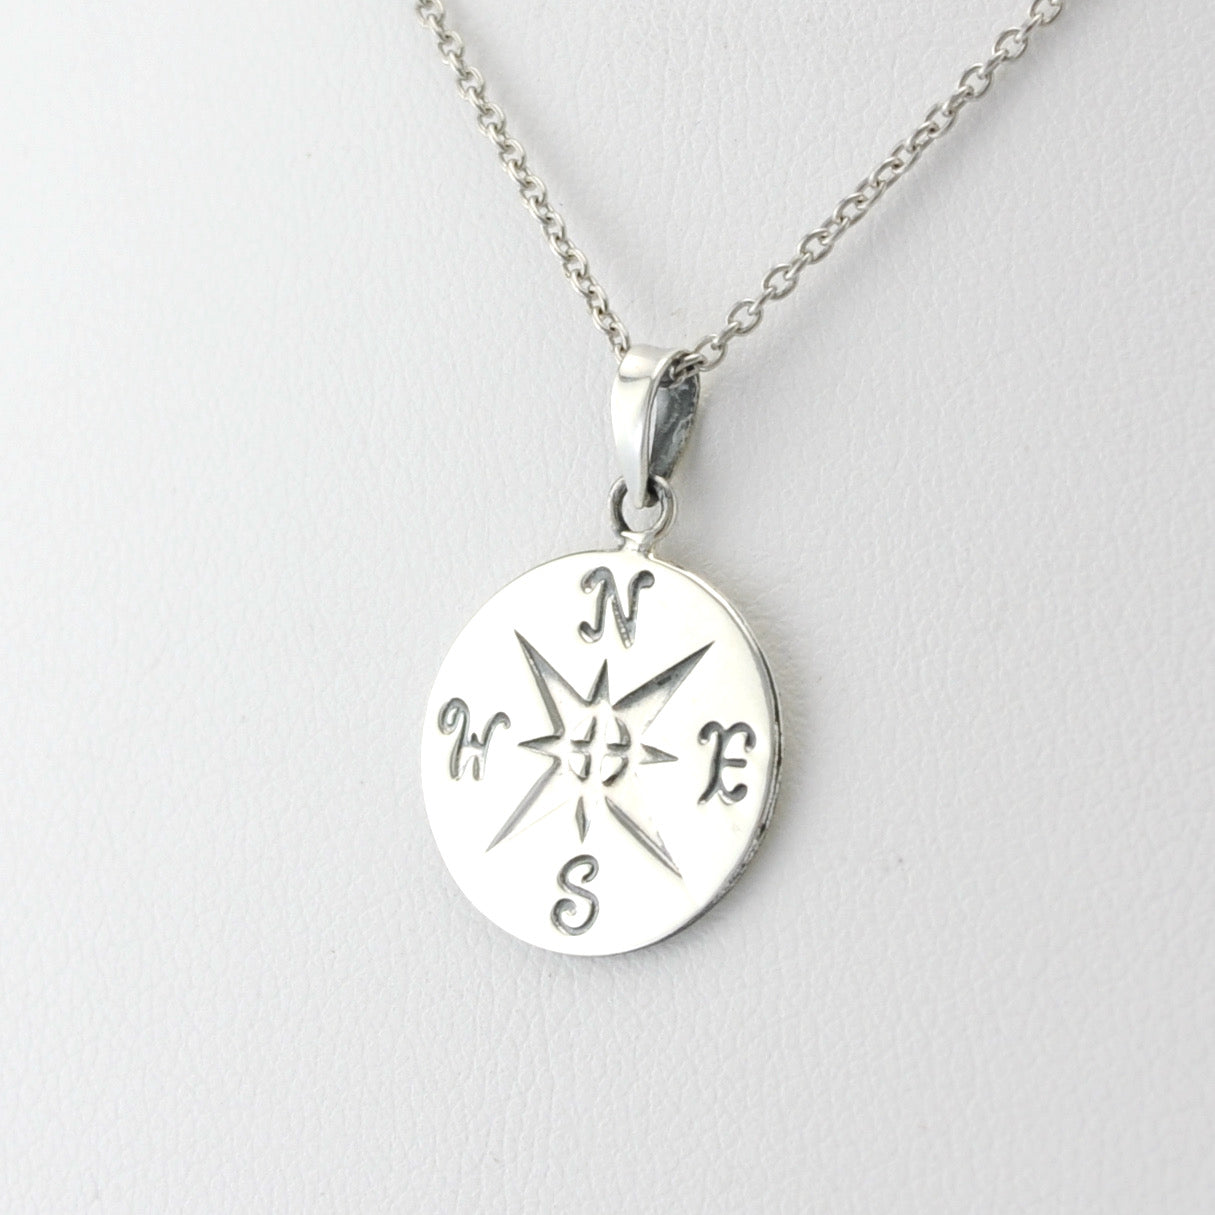 Silver Compass Necklace